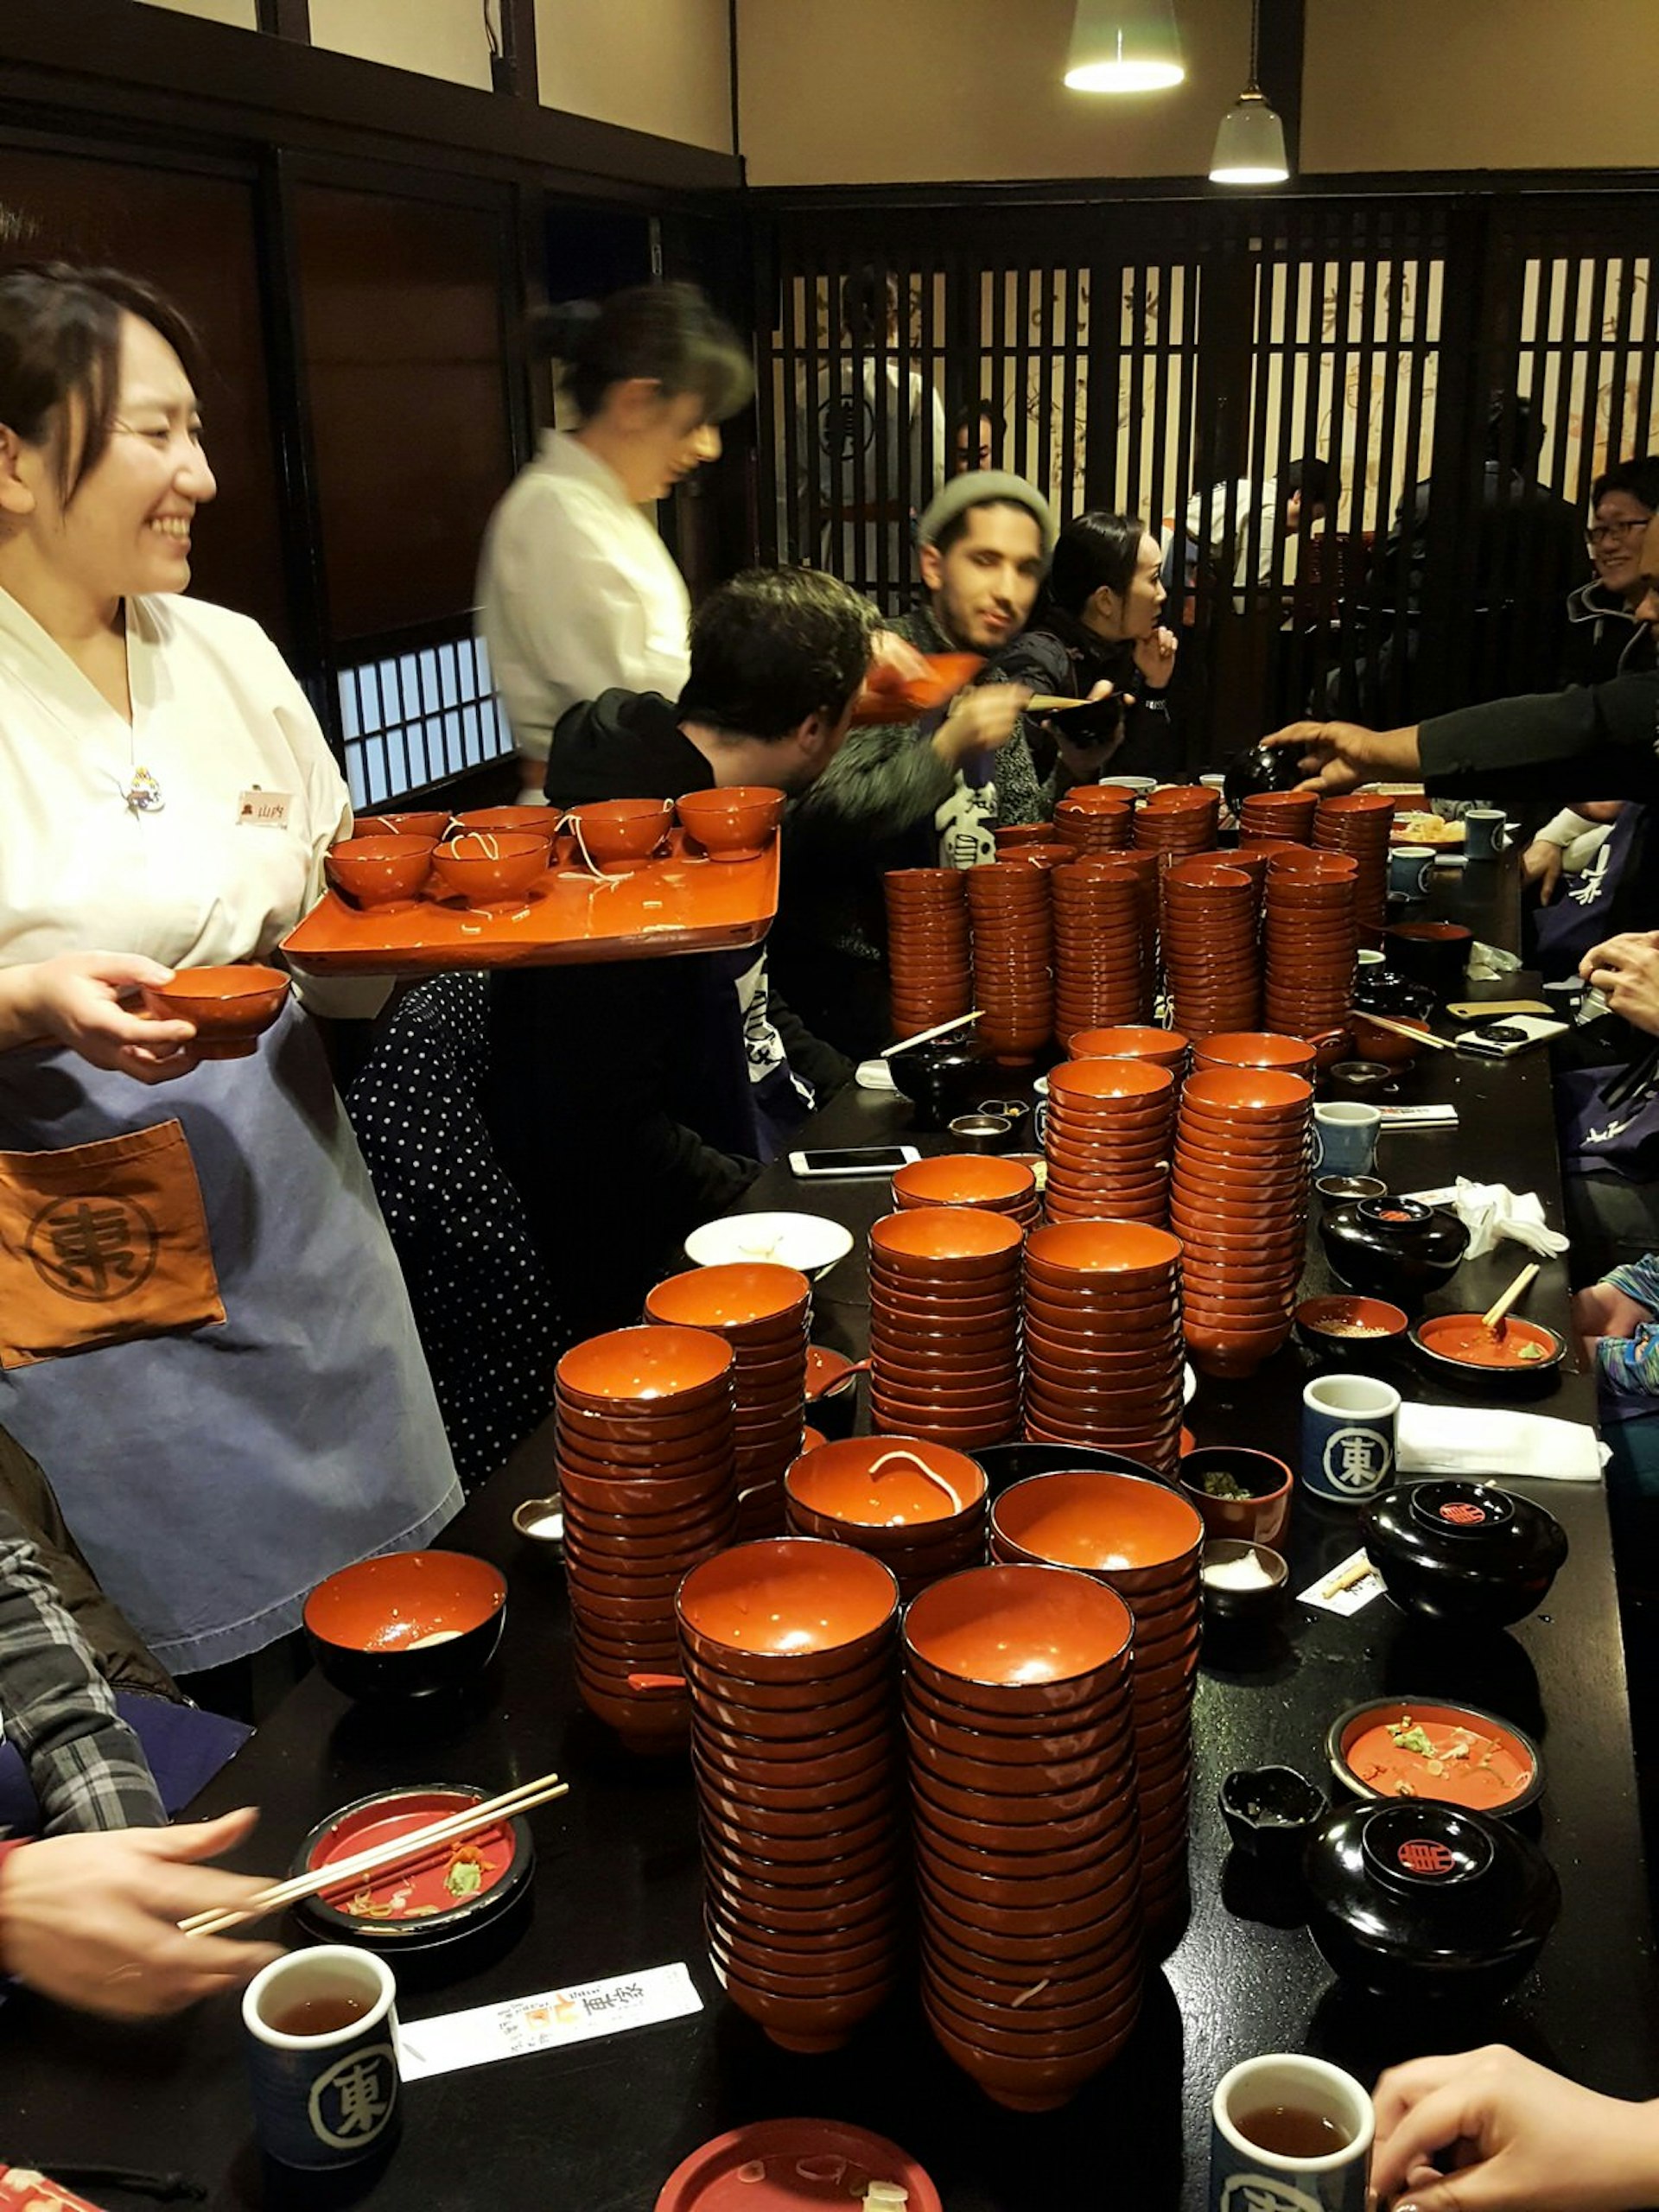 The busy interior of Azumaya, Morioka with long table full of stacks of small empty noodle bowls and customers, as staff stand beside with trays of more noodles